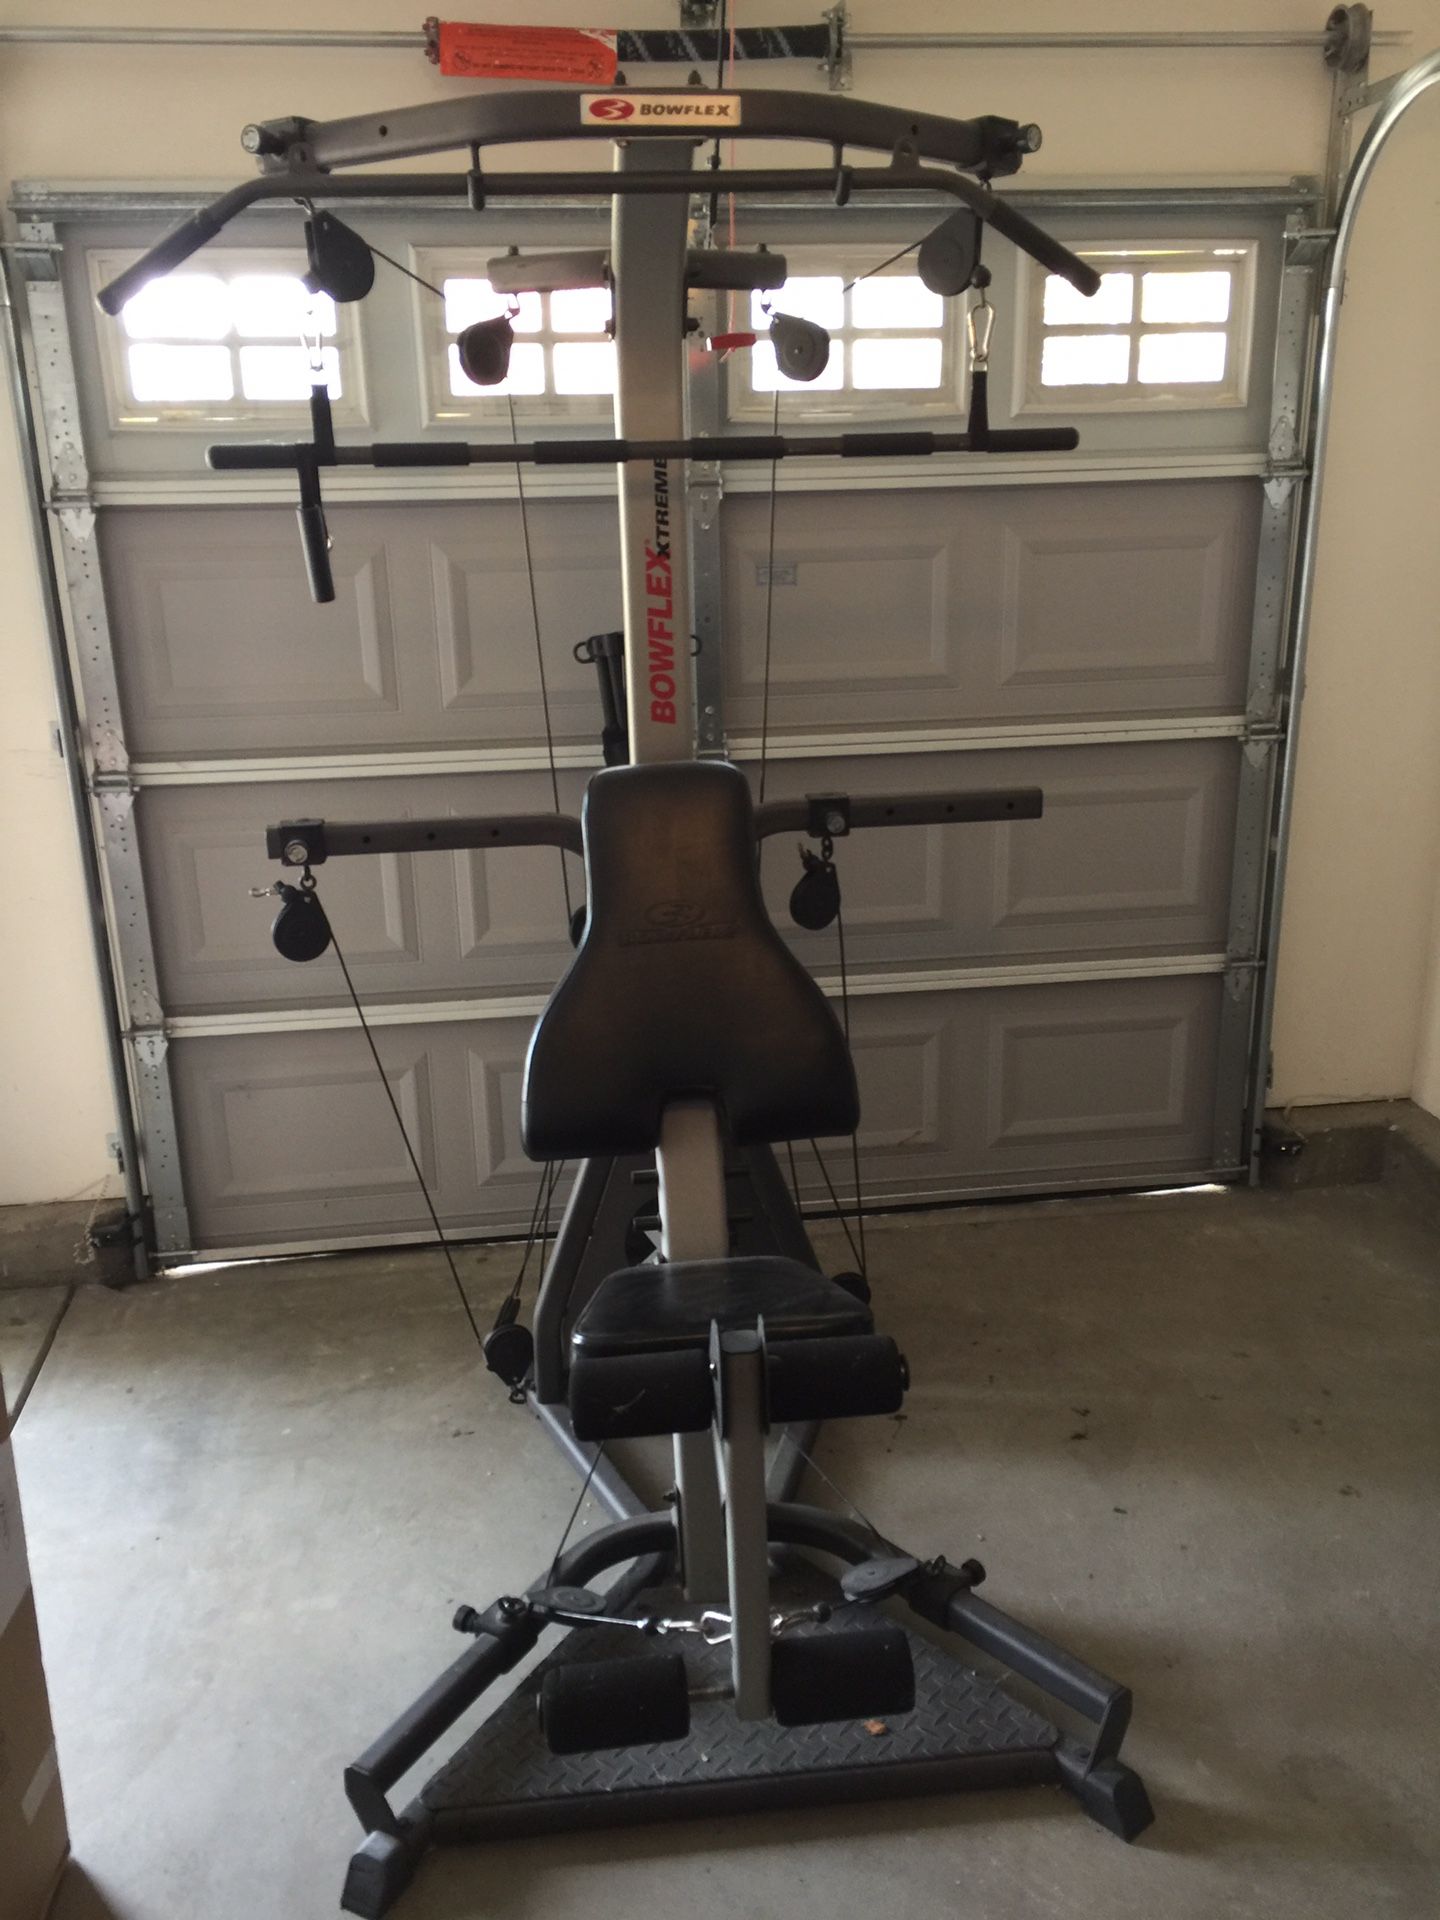 Bowflex for Home Gym - Barely Used, Great Price